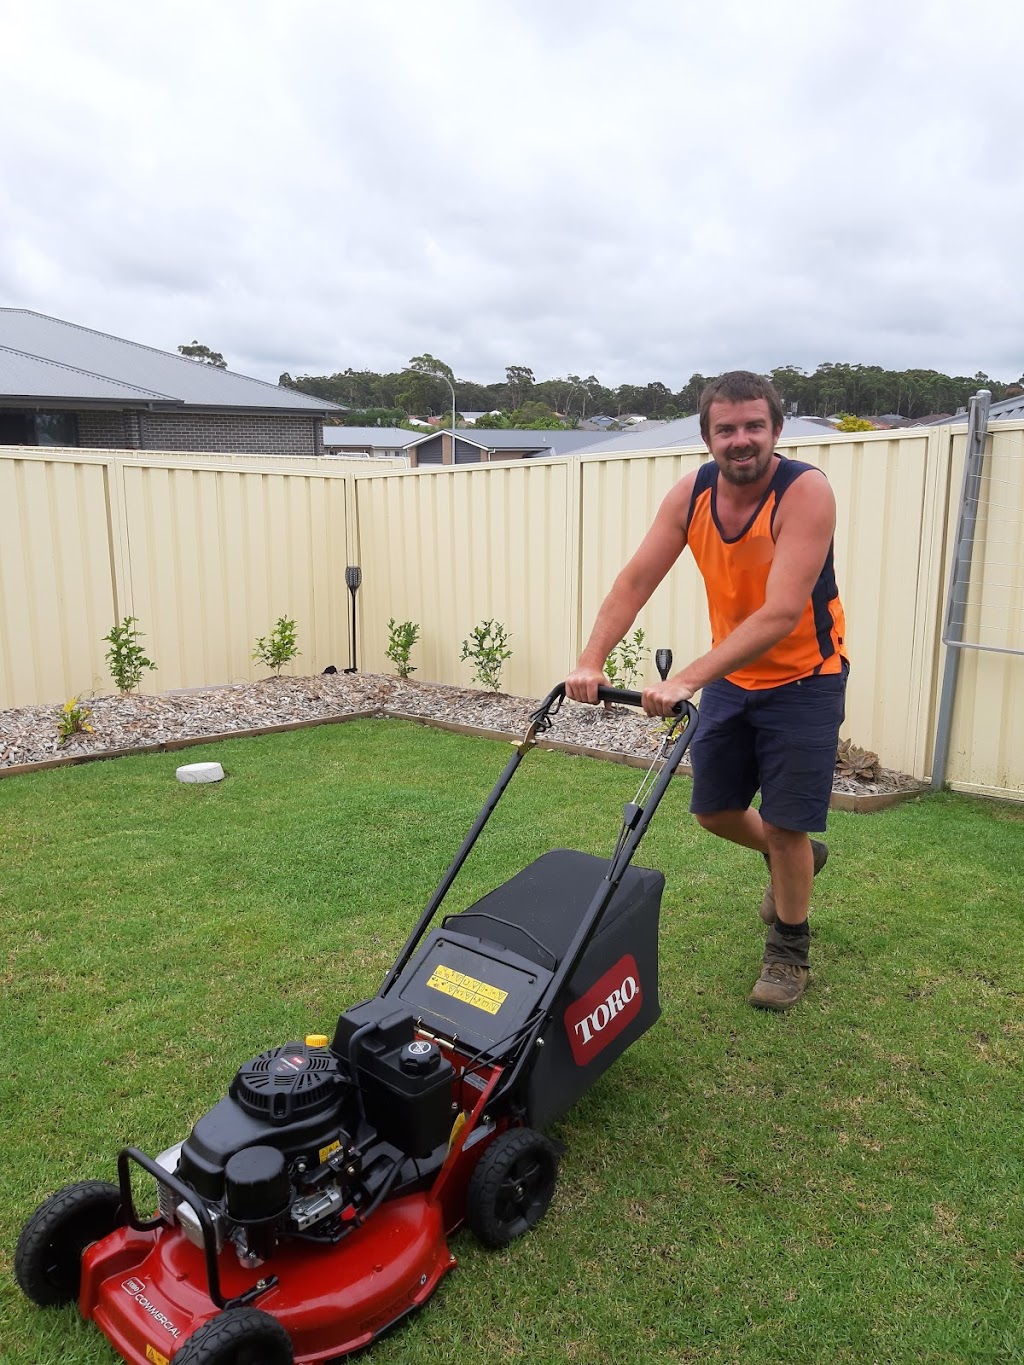 BSL Lawns and Maintenance | general contractor | 61 Cammaray Dr, St Georges Basin NSW 2540, Australia | 0423352278 OR +61 423 352 278